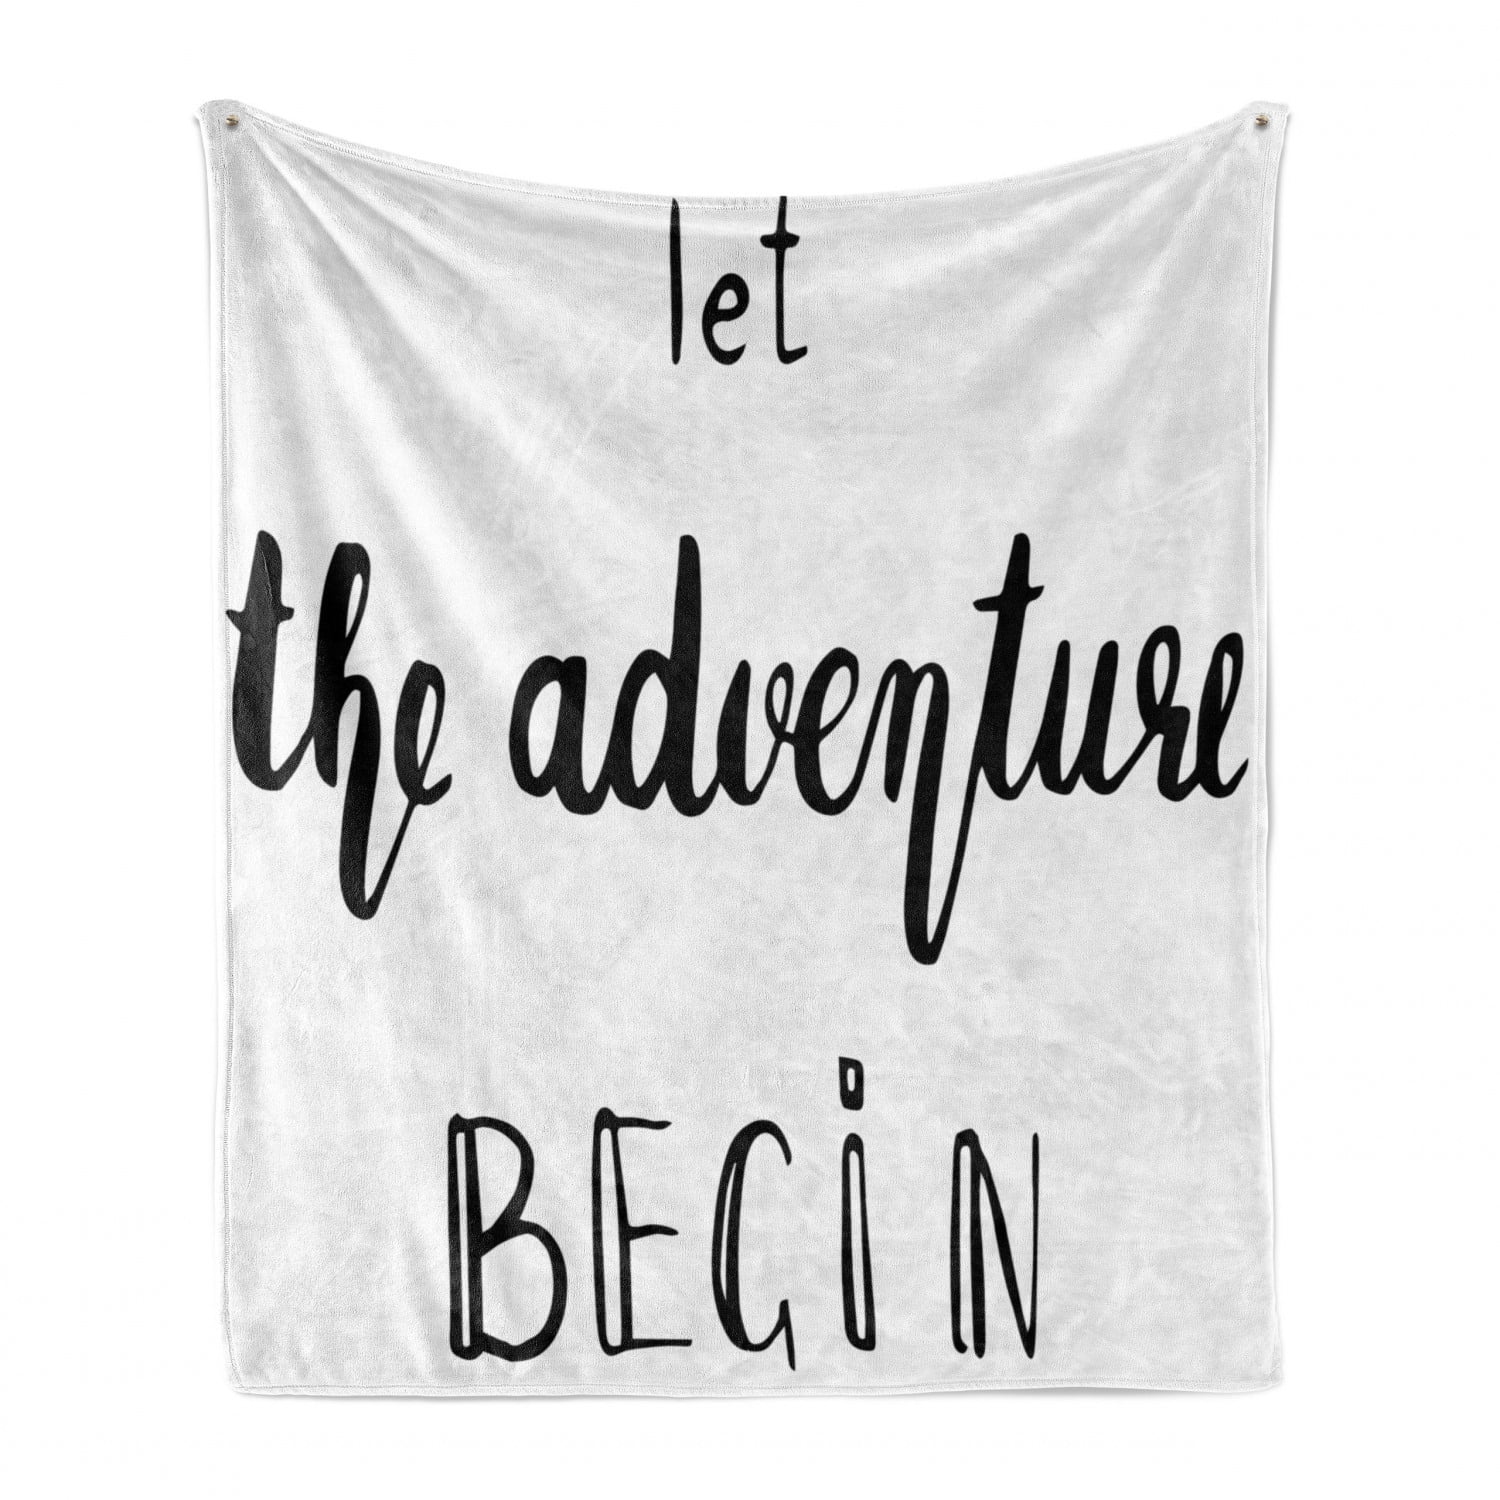 Hand Written Style Different Typography Inspirational Words of Wisdom Doodle Art 50 x 60 Cozy Plush for Indoor and Outdoor Use Ambesonne Adventure Soft Flannel Fleece Throw Blanket Black White 